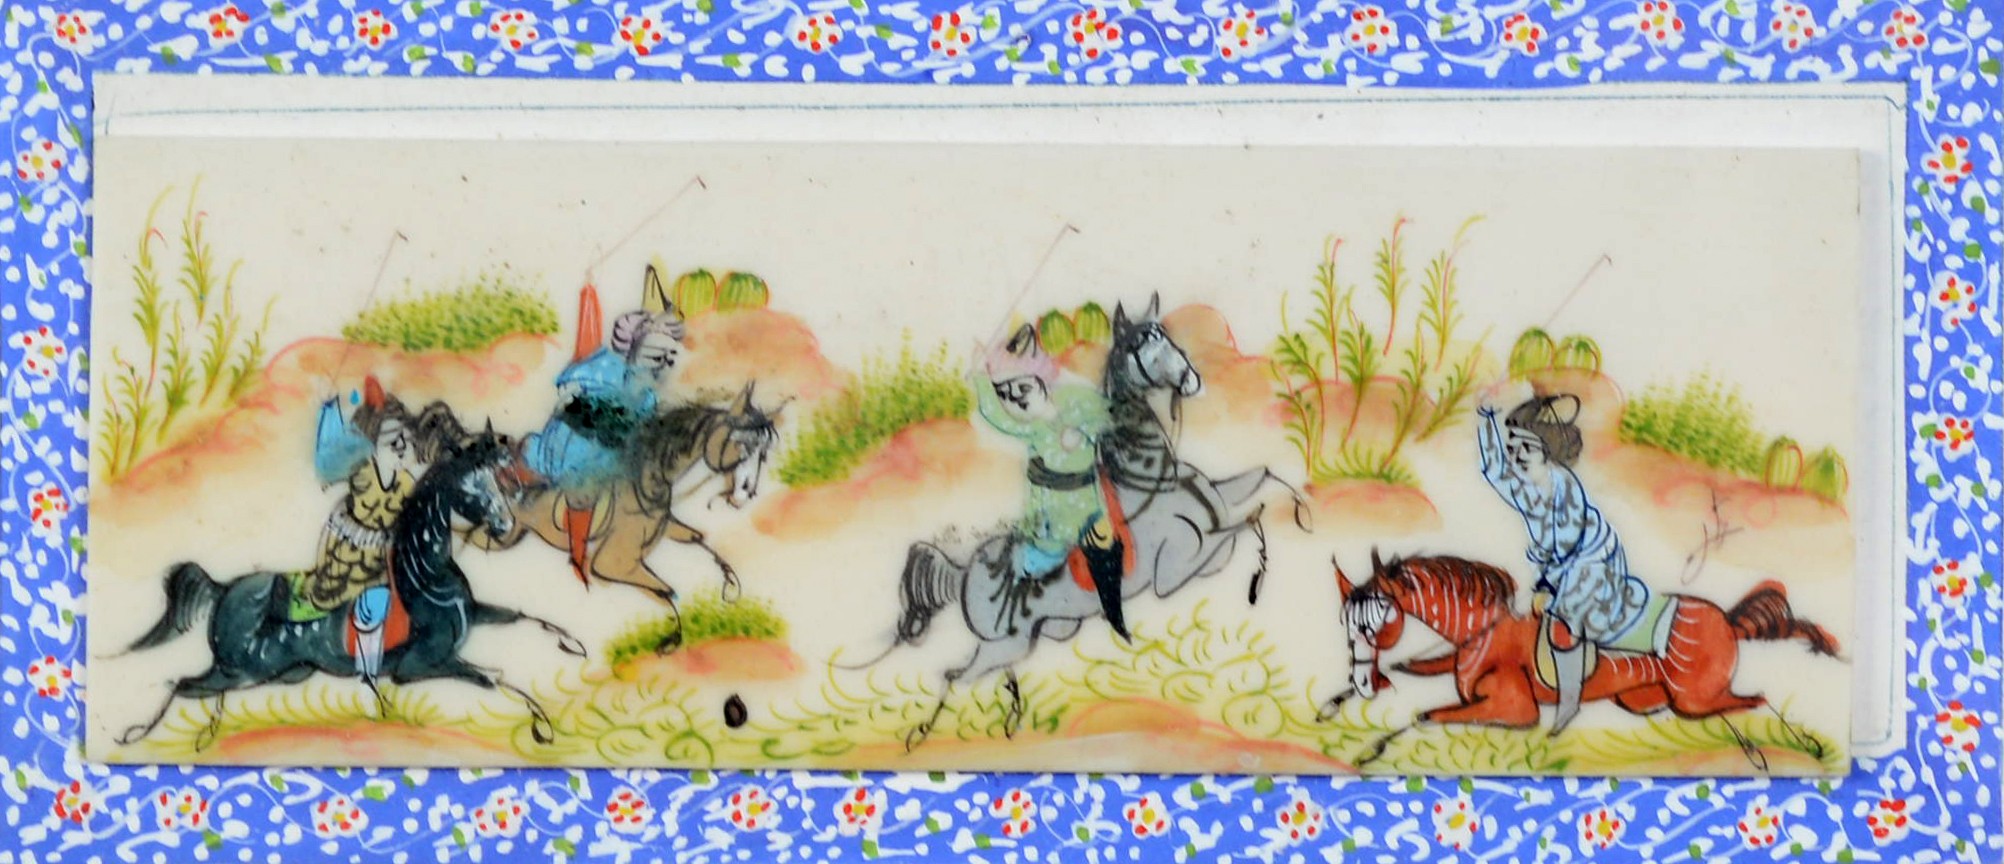 PAIR OF INDIAN GOUACHE DRAWINGS ON PAPER, EACH OF TWO WARRIORS, ONE ON HORSEBACK, within embroidered